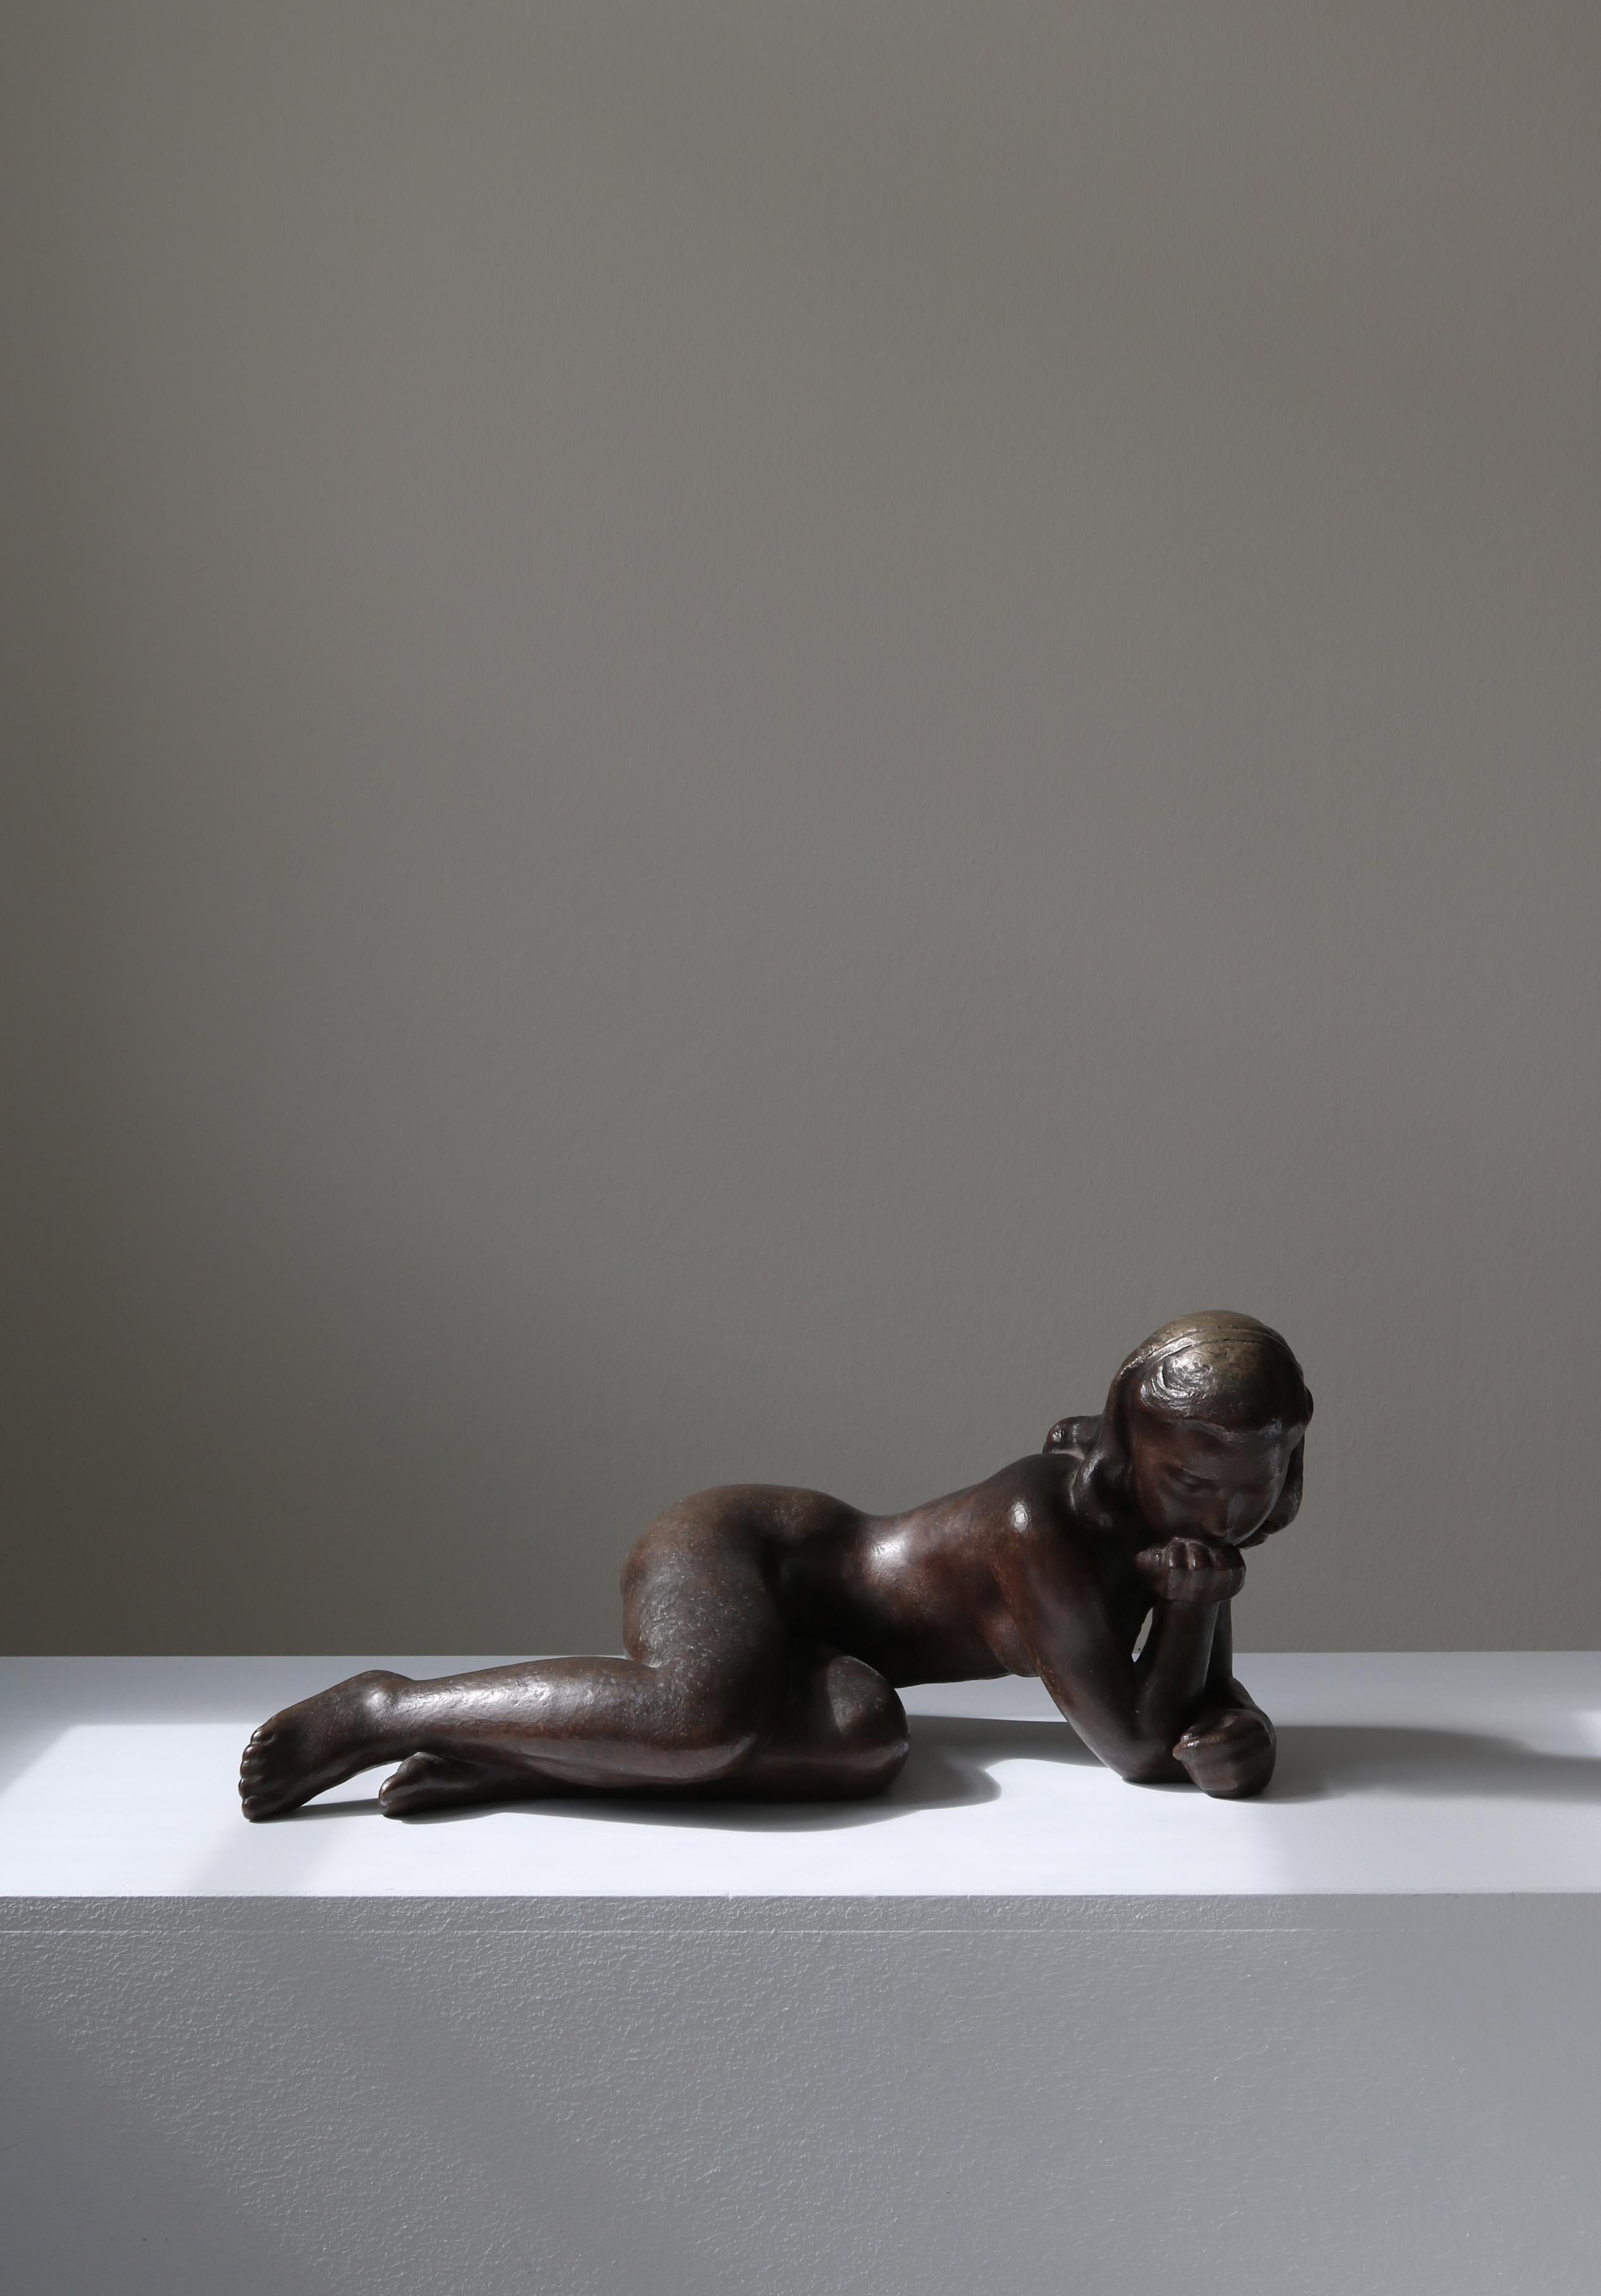 Large cast bronze sculpture by Danish artist Johannes Hansen depicting a young girl lost in thoughts. The sculpture was made in the 1940s at the bronze foundry 